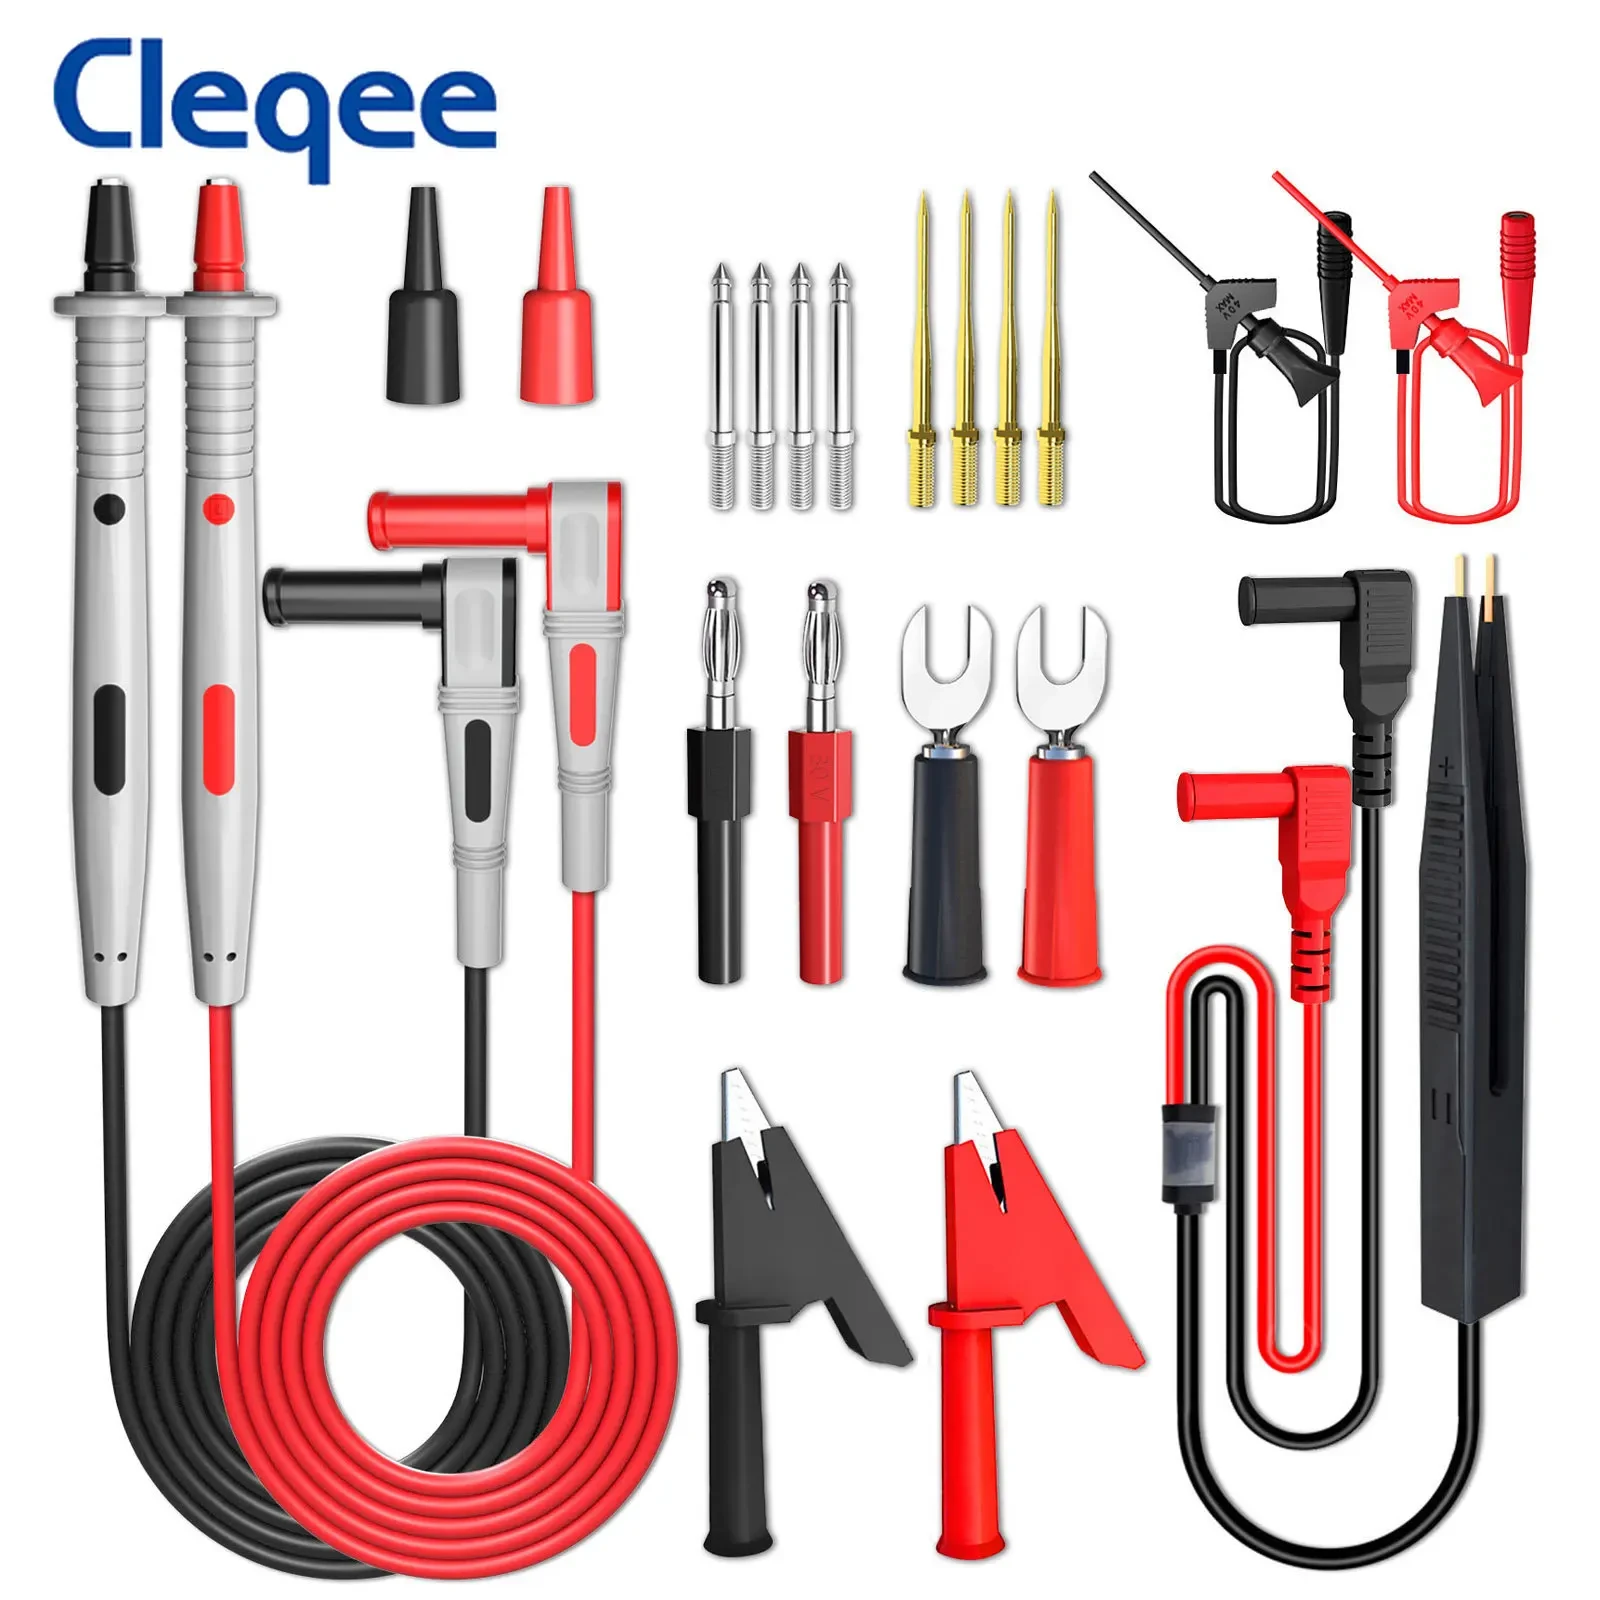 Cleqee P1503E Multimeter probes replaceable needles test leads kits probes for digital multimeter cable feeler for multimeter